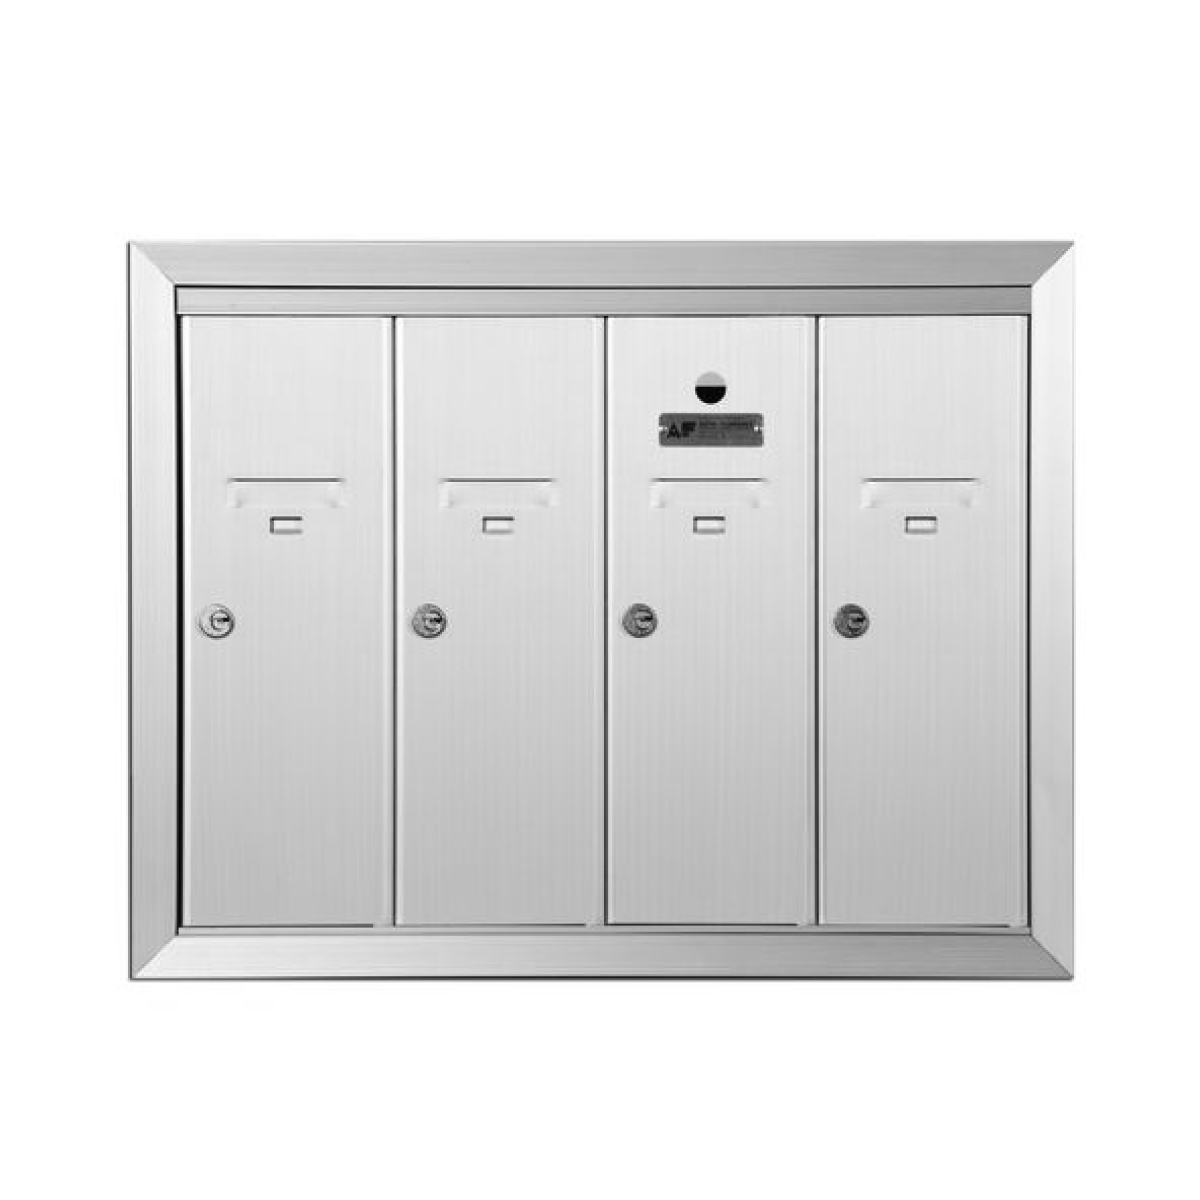 Anodized Aluminum Florence 4 Door Vertical Mailbox Product Image